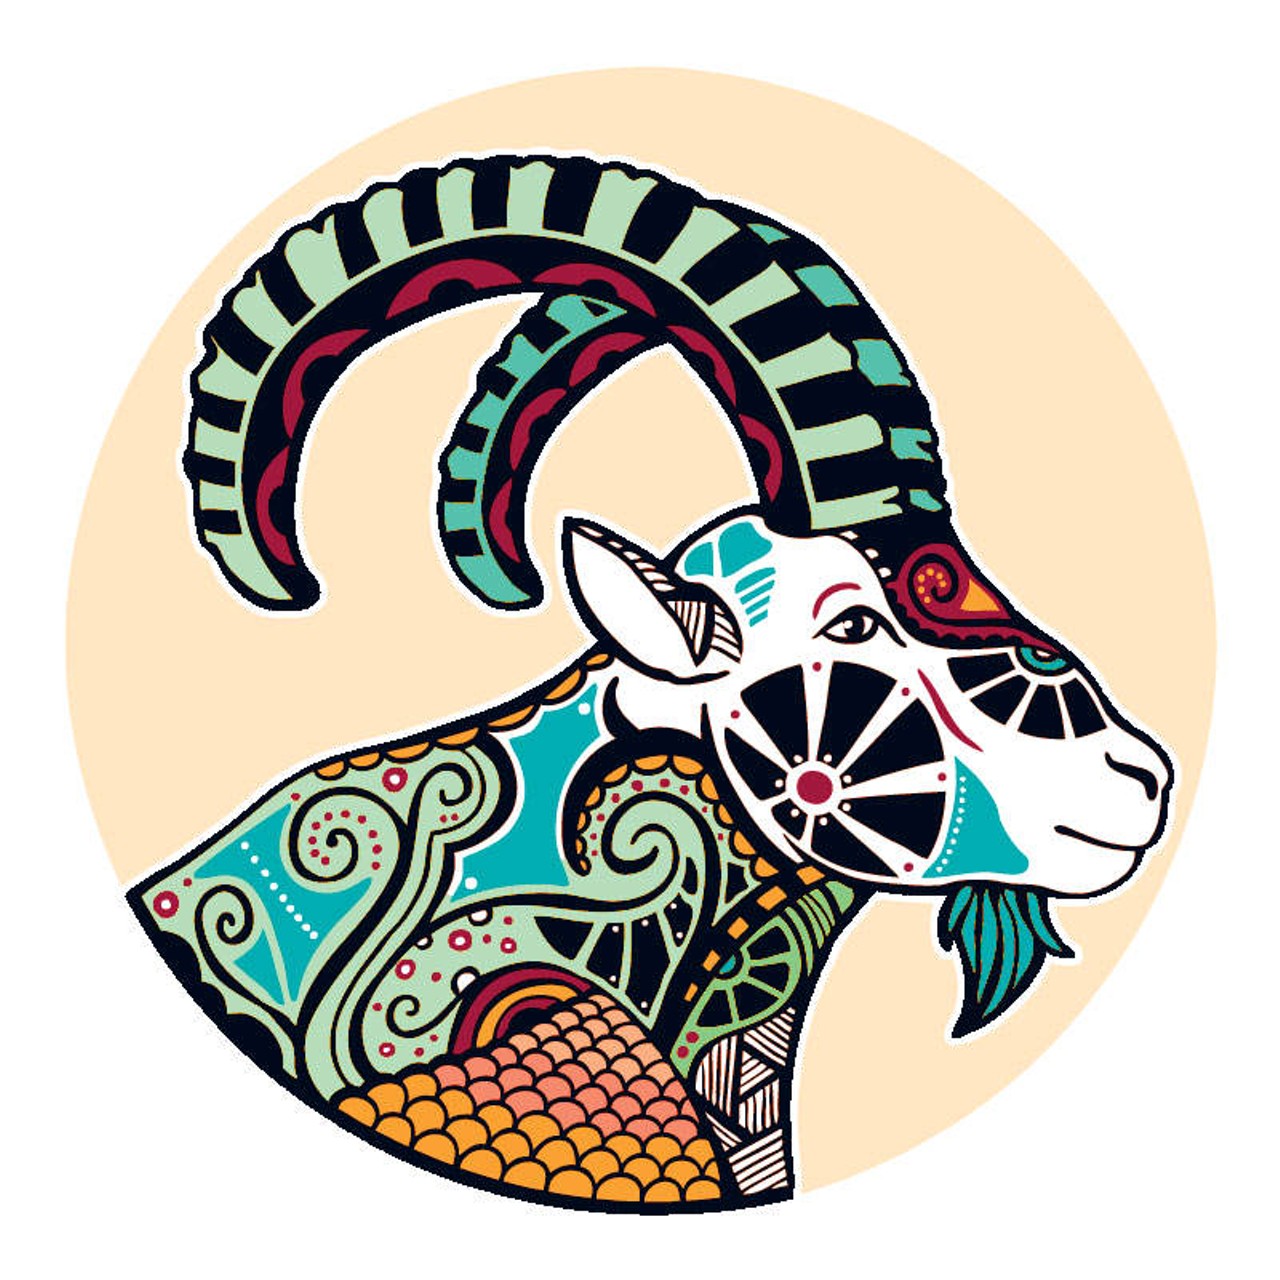 CAPRICORN (Dec. 21-Jan. 20): 
This is getting crazier by the minute. When you turned your life around you weren&#146;t expecting every last thing to change &#151; but that&#146;s the way it the universe works; when one thing changes everything has to change. So what are you looking at? Whatever it is, your best bet would be to hang loose and not get too worried about what it all means. When the cards are getting reshuffled you can&#146;t read your fortune until they fall into place. It isn&#146;t even time to cut the deck yet so sit back and watch the show. Sooner or later all of this craziness will begin to make sense.